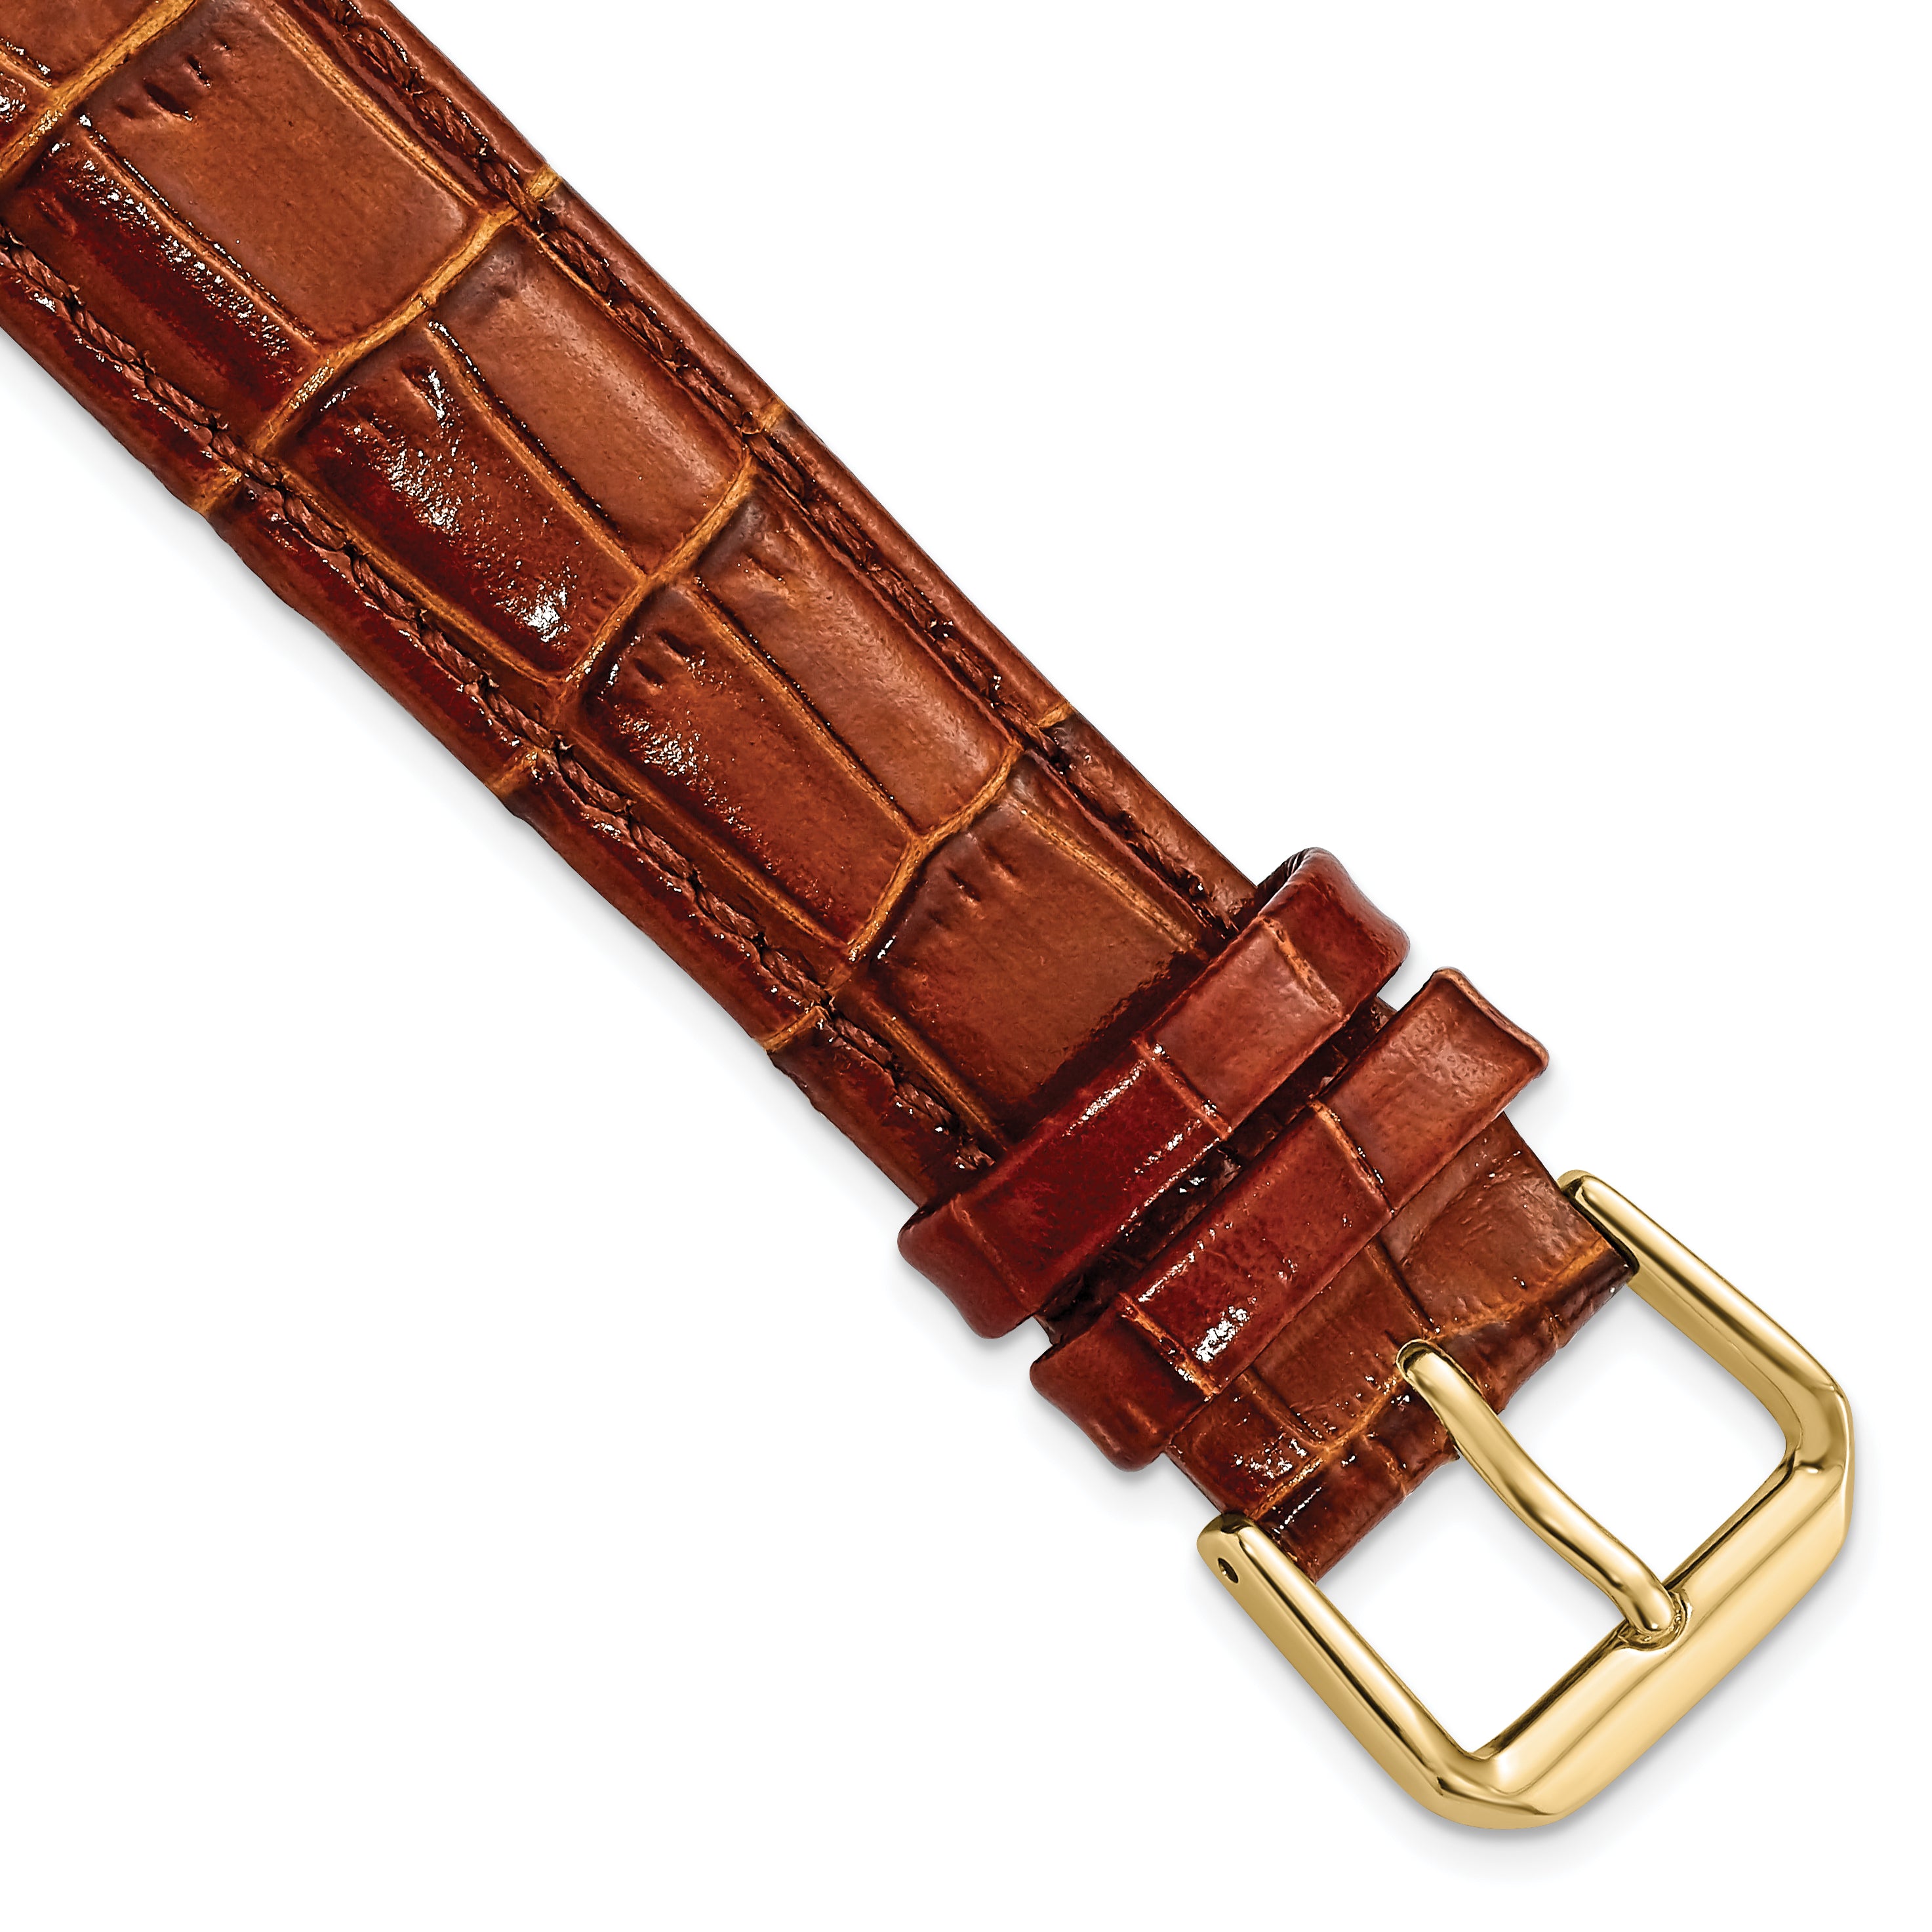 DeBeer 18mm Havana Crocodile Grain Leather with Dark Stitching and Gold-tone Buckle 7.5 inch Watch Band